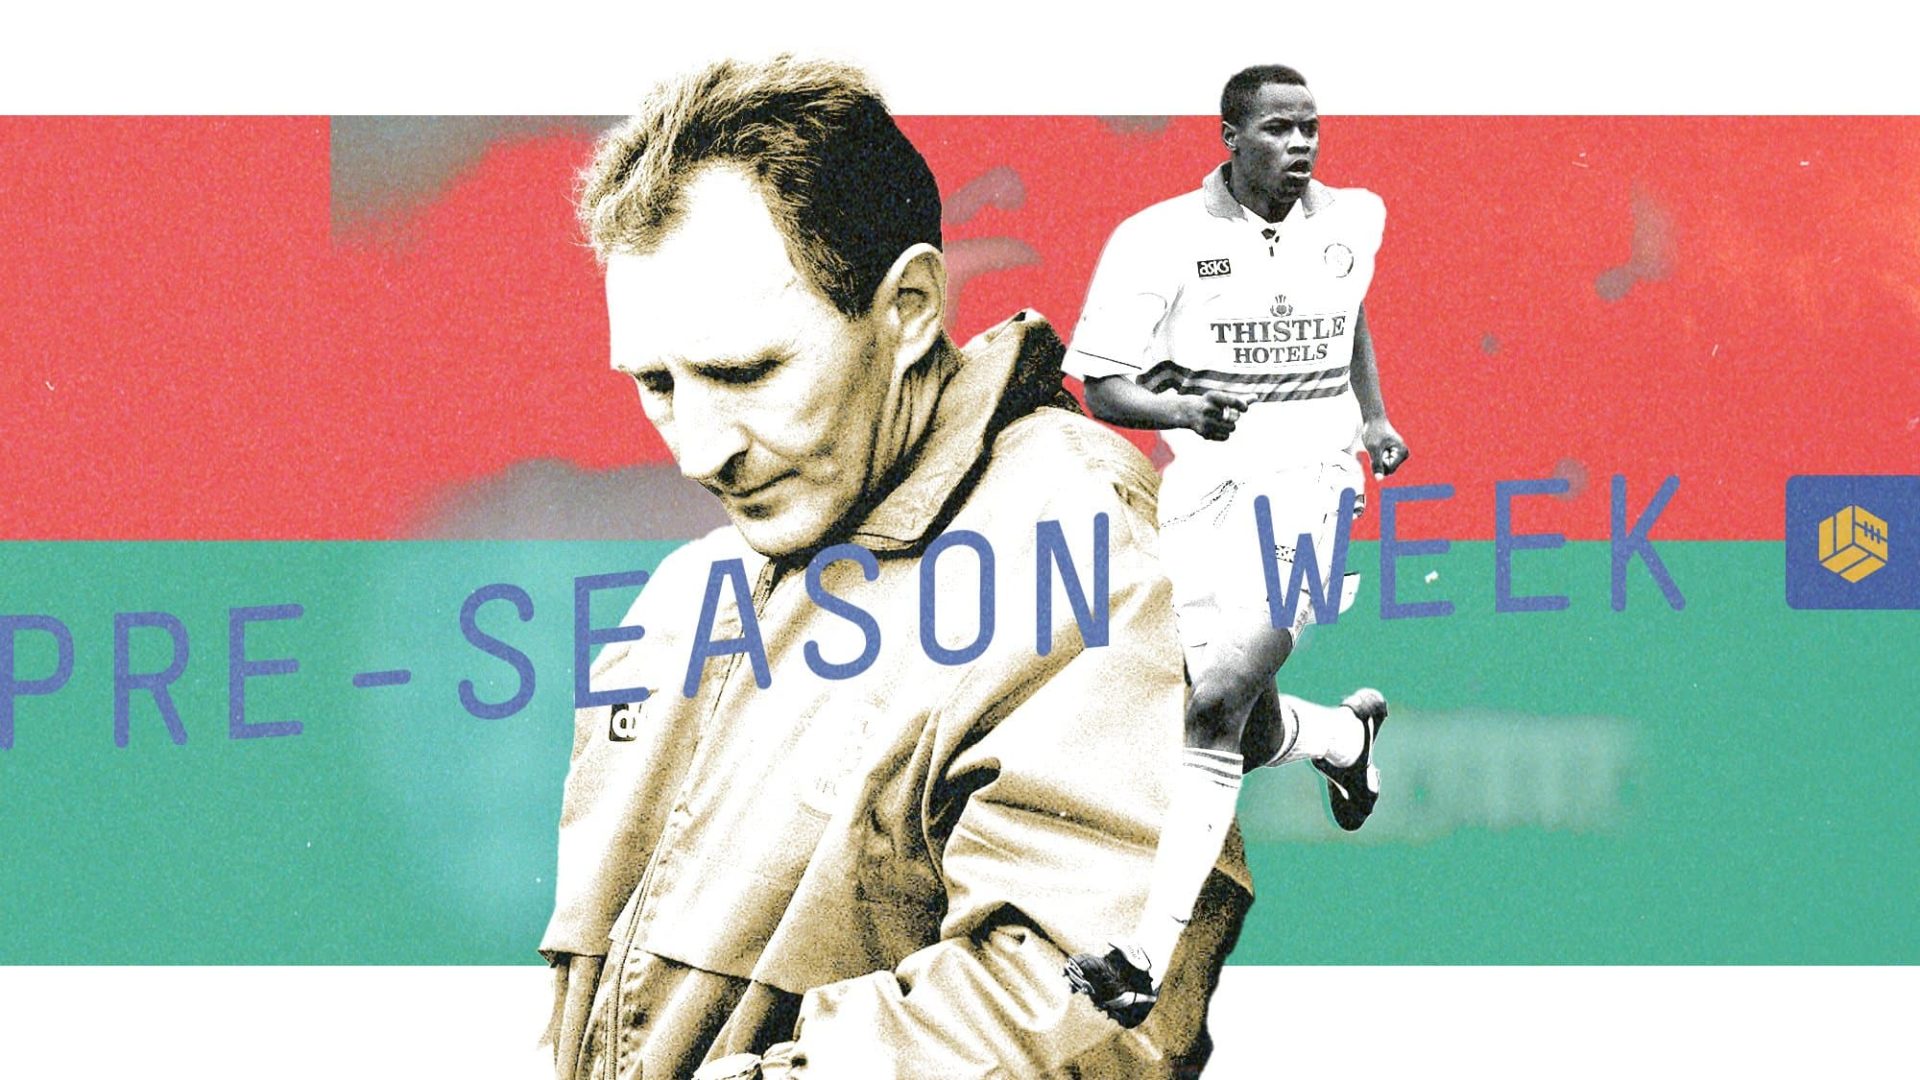 Howard Wilkinson and Phil Masinga on a red and green background